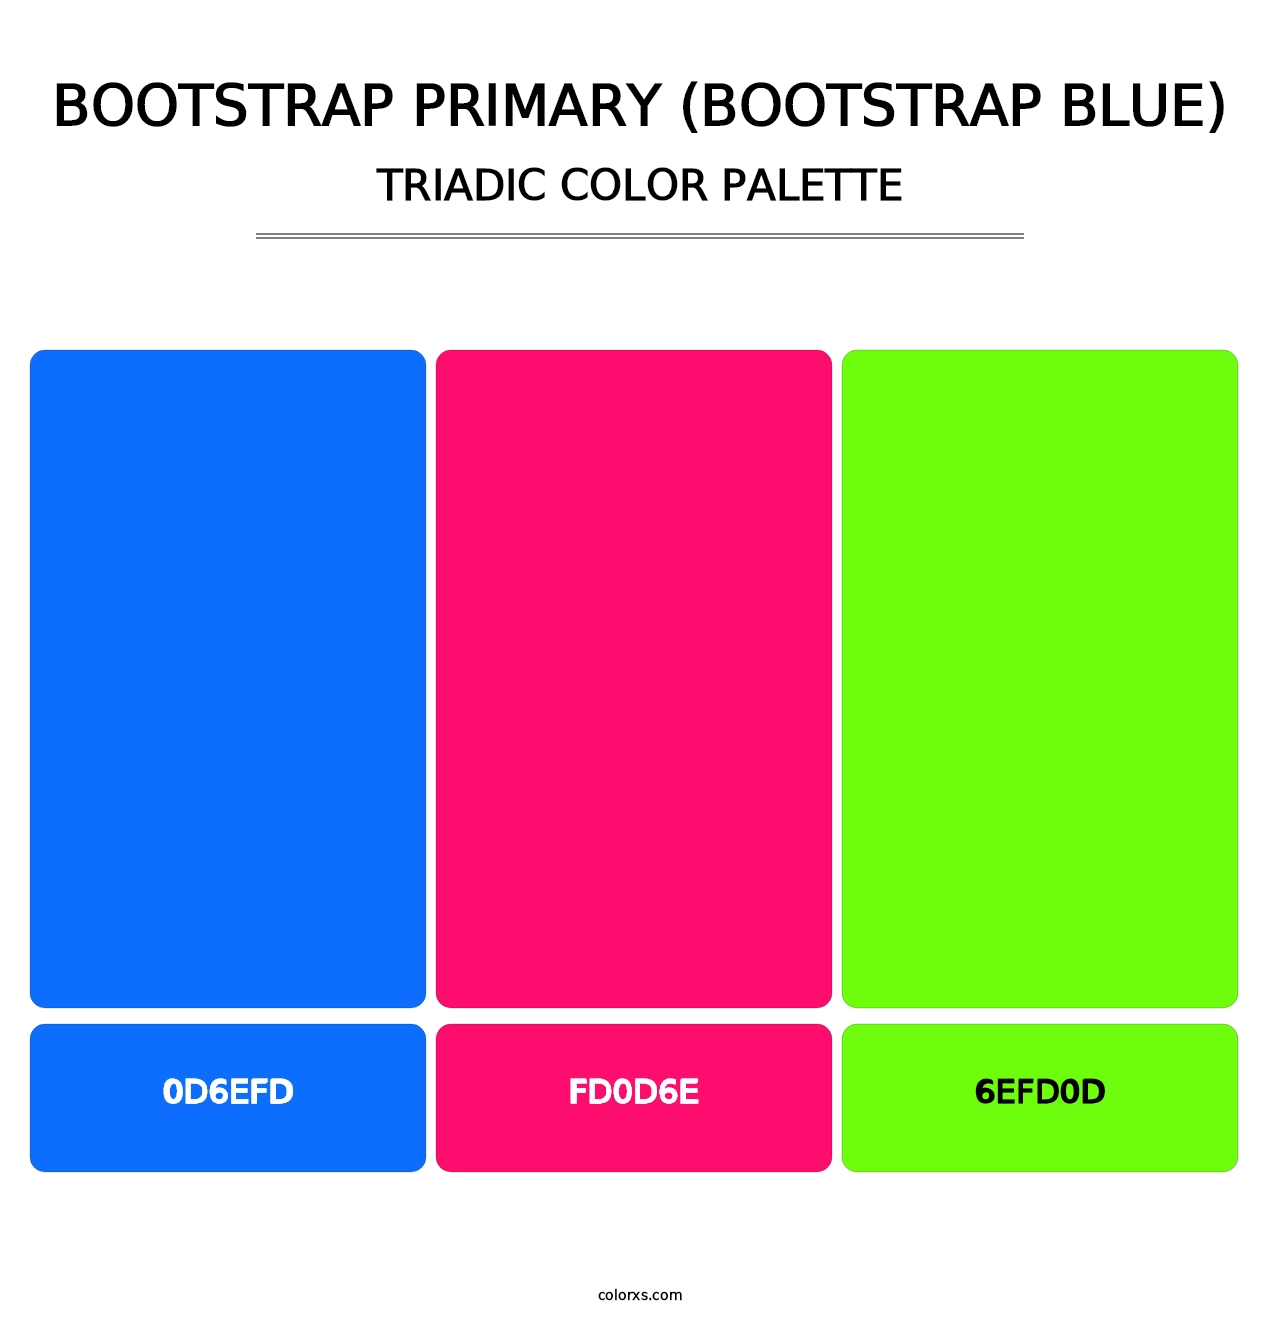 Bootstrap Primary (Bootstrap Blue) - Triadic Color Palette